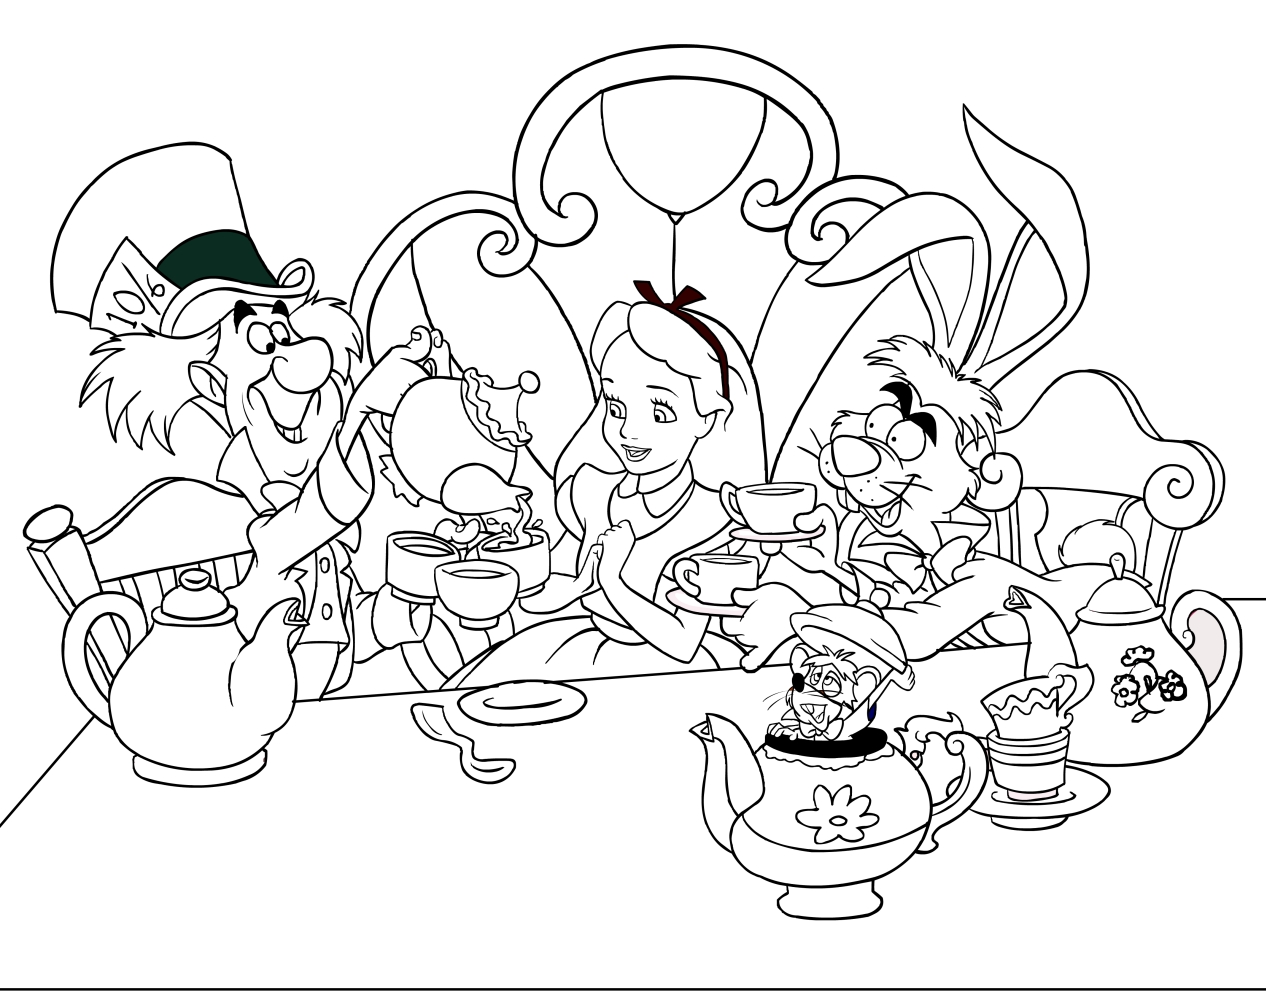  Alice, the mad hatter and the hare leap, coloring page to print